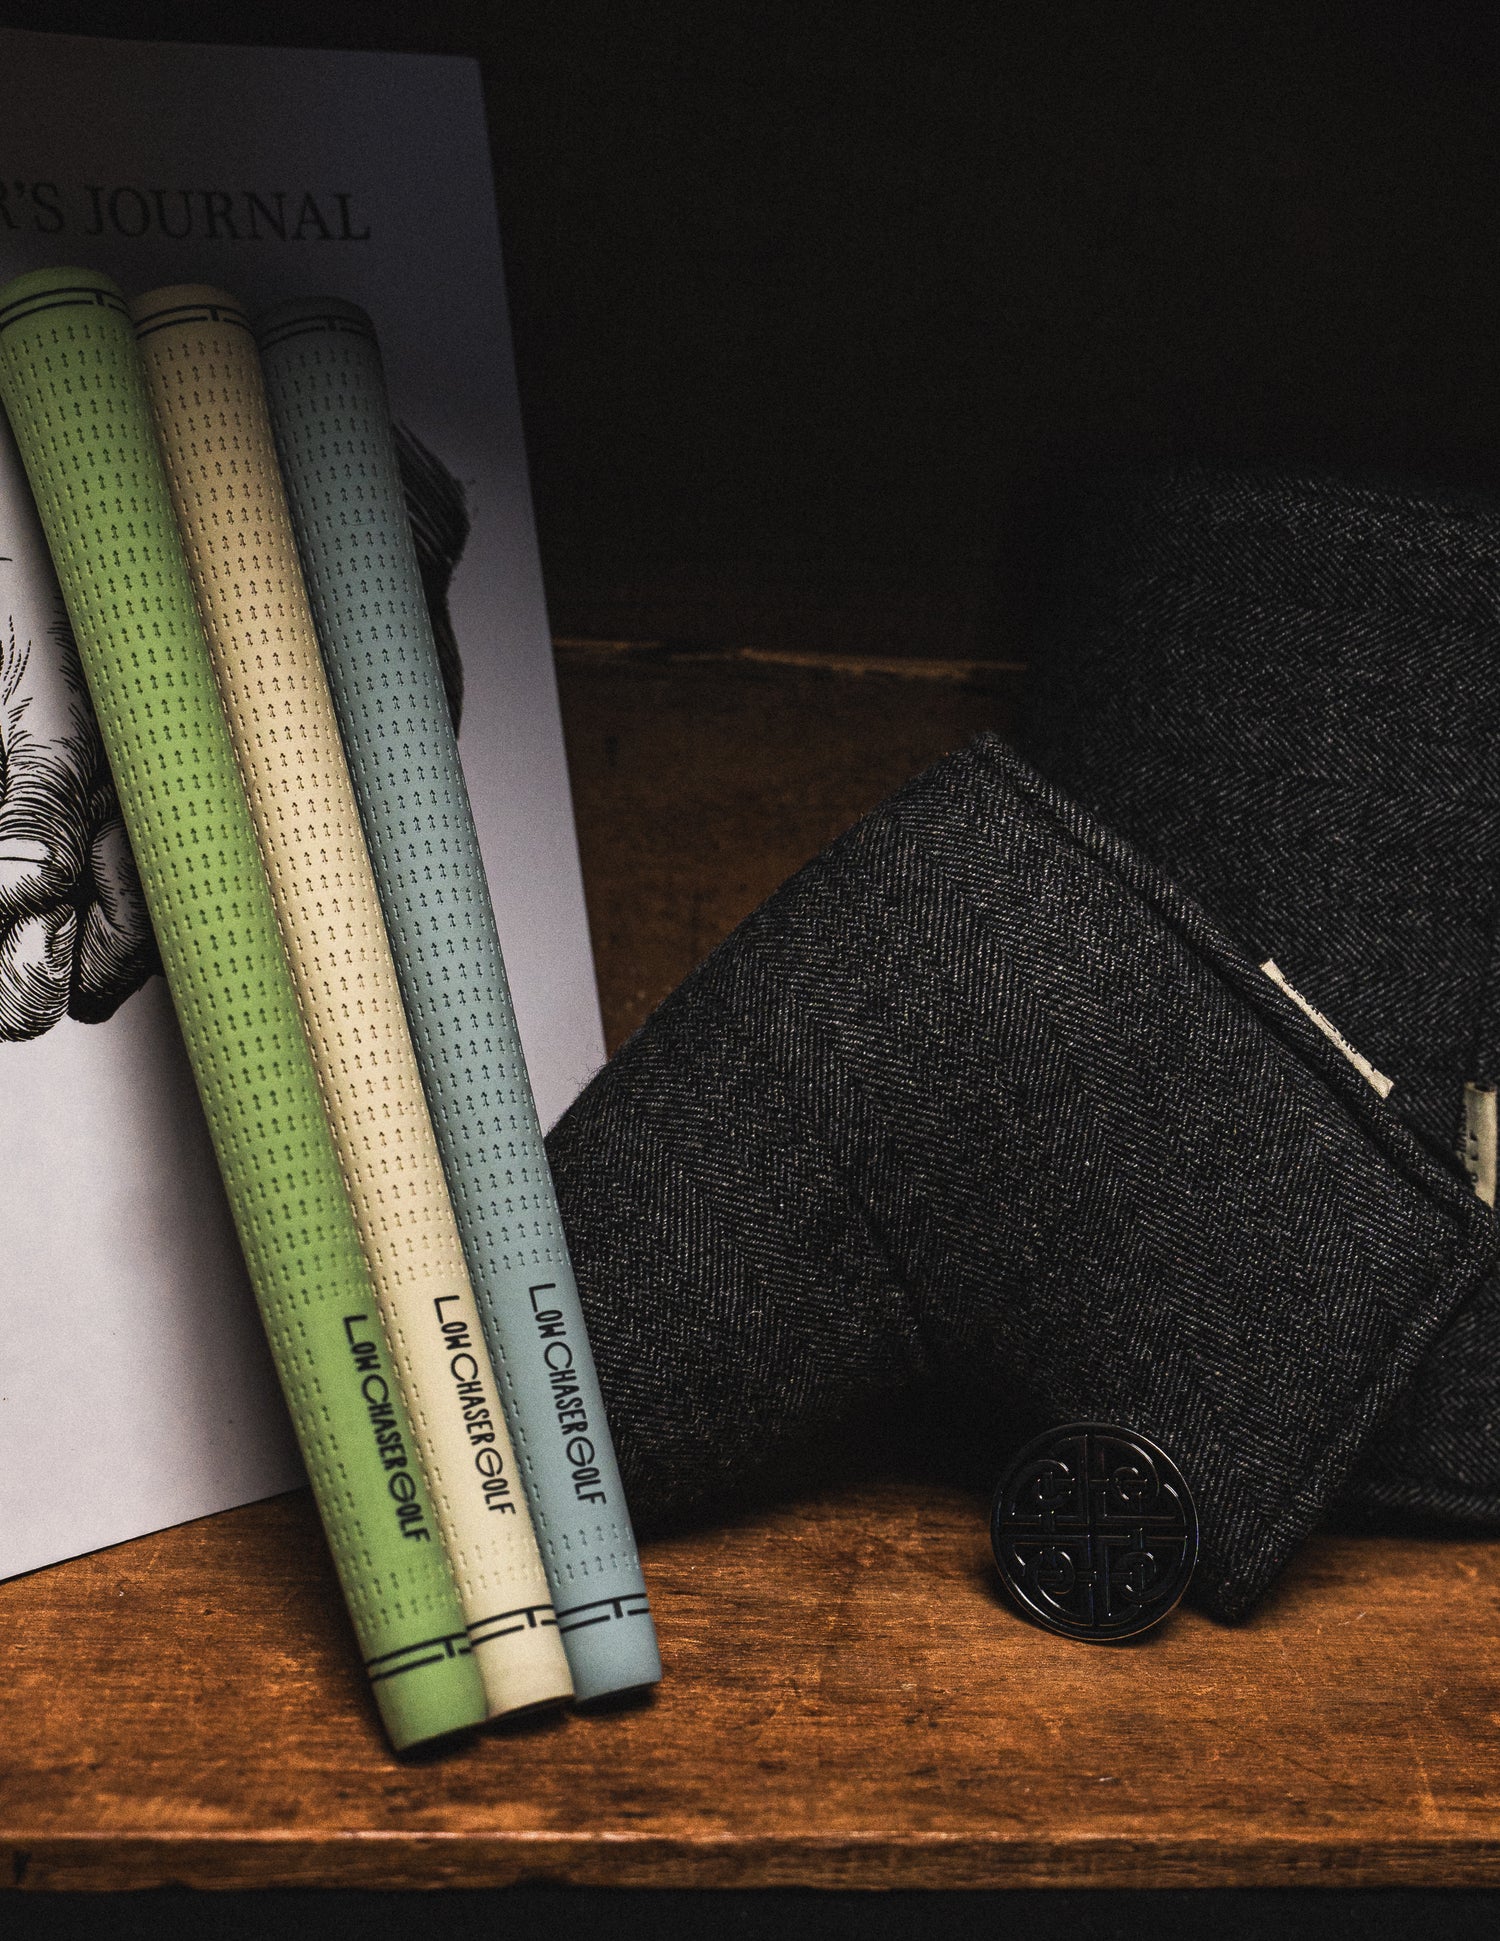 Cream, green and blue grips against a copy of the golfers journal, and charcoal headcovers.